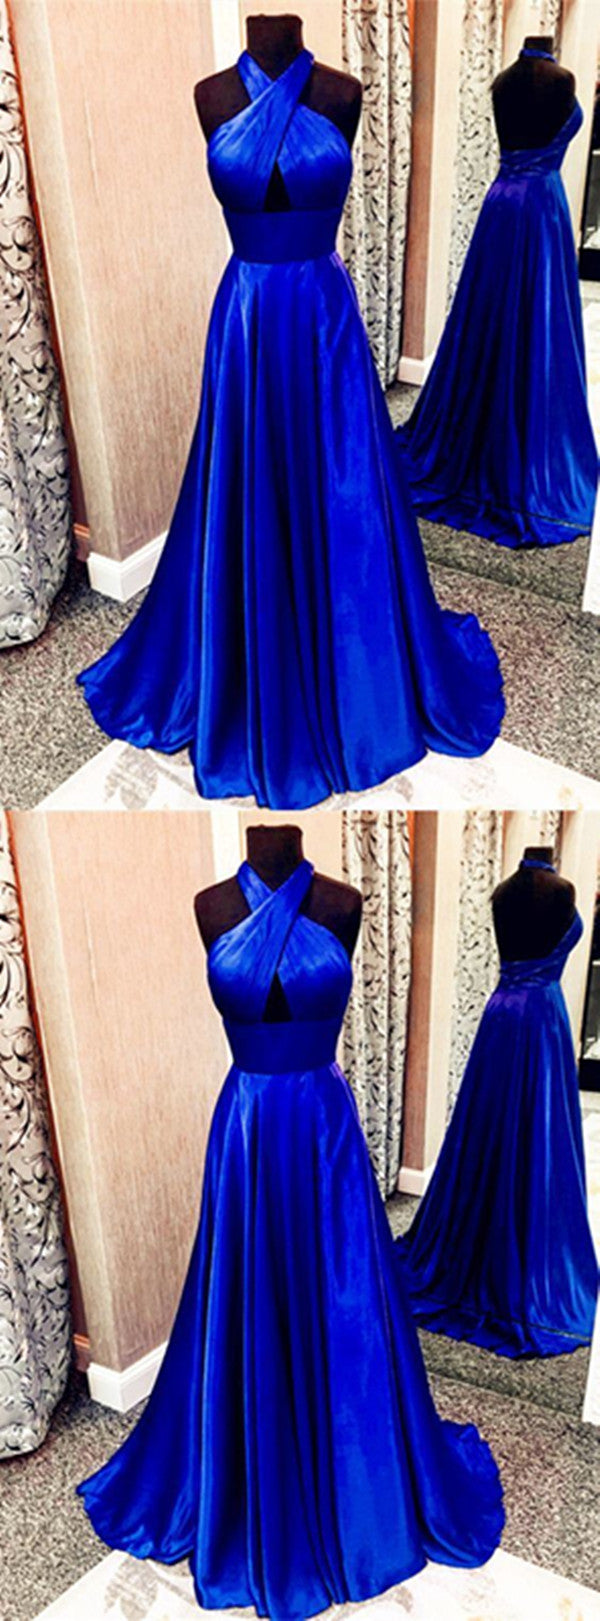 Backless Royal Blue Long A-line Prom Dress, Sexy Evening Party Dress